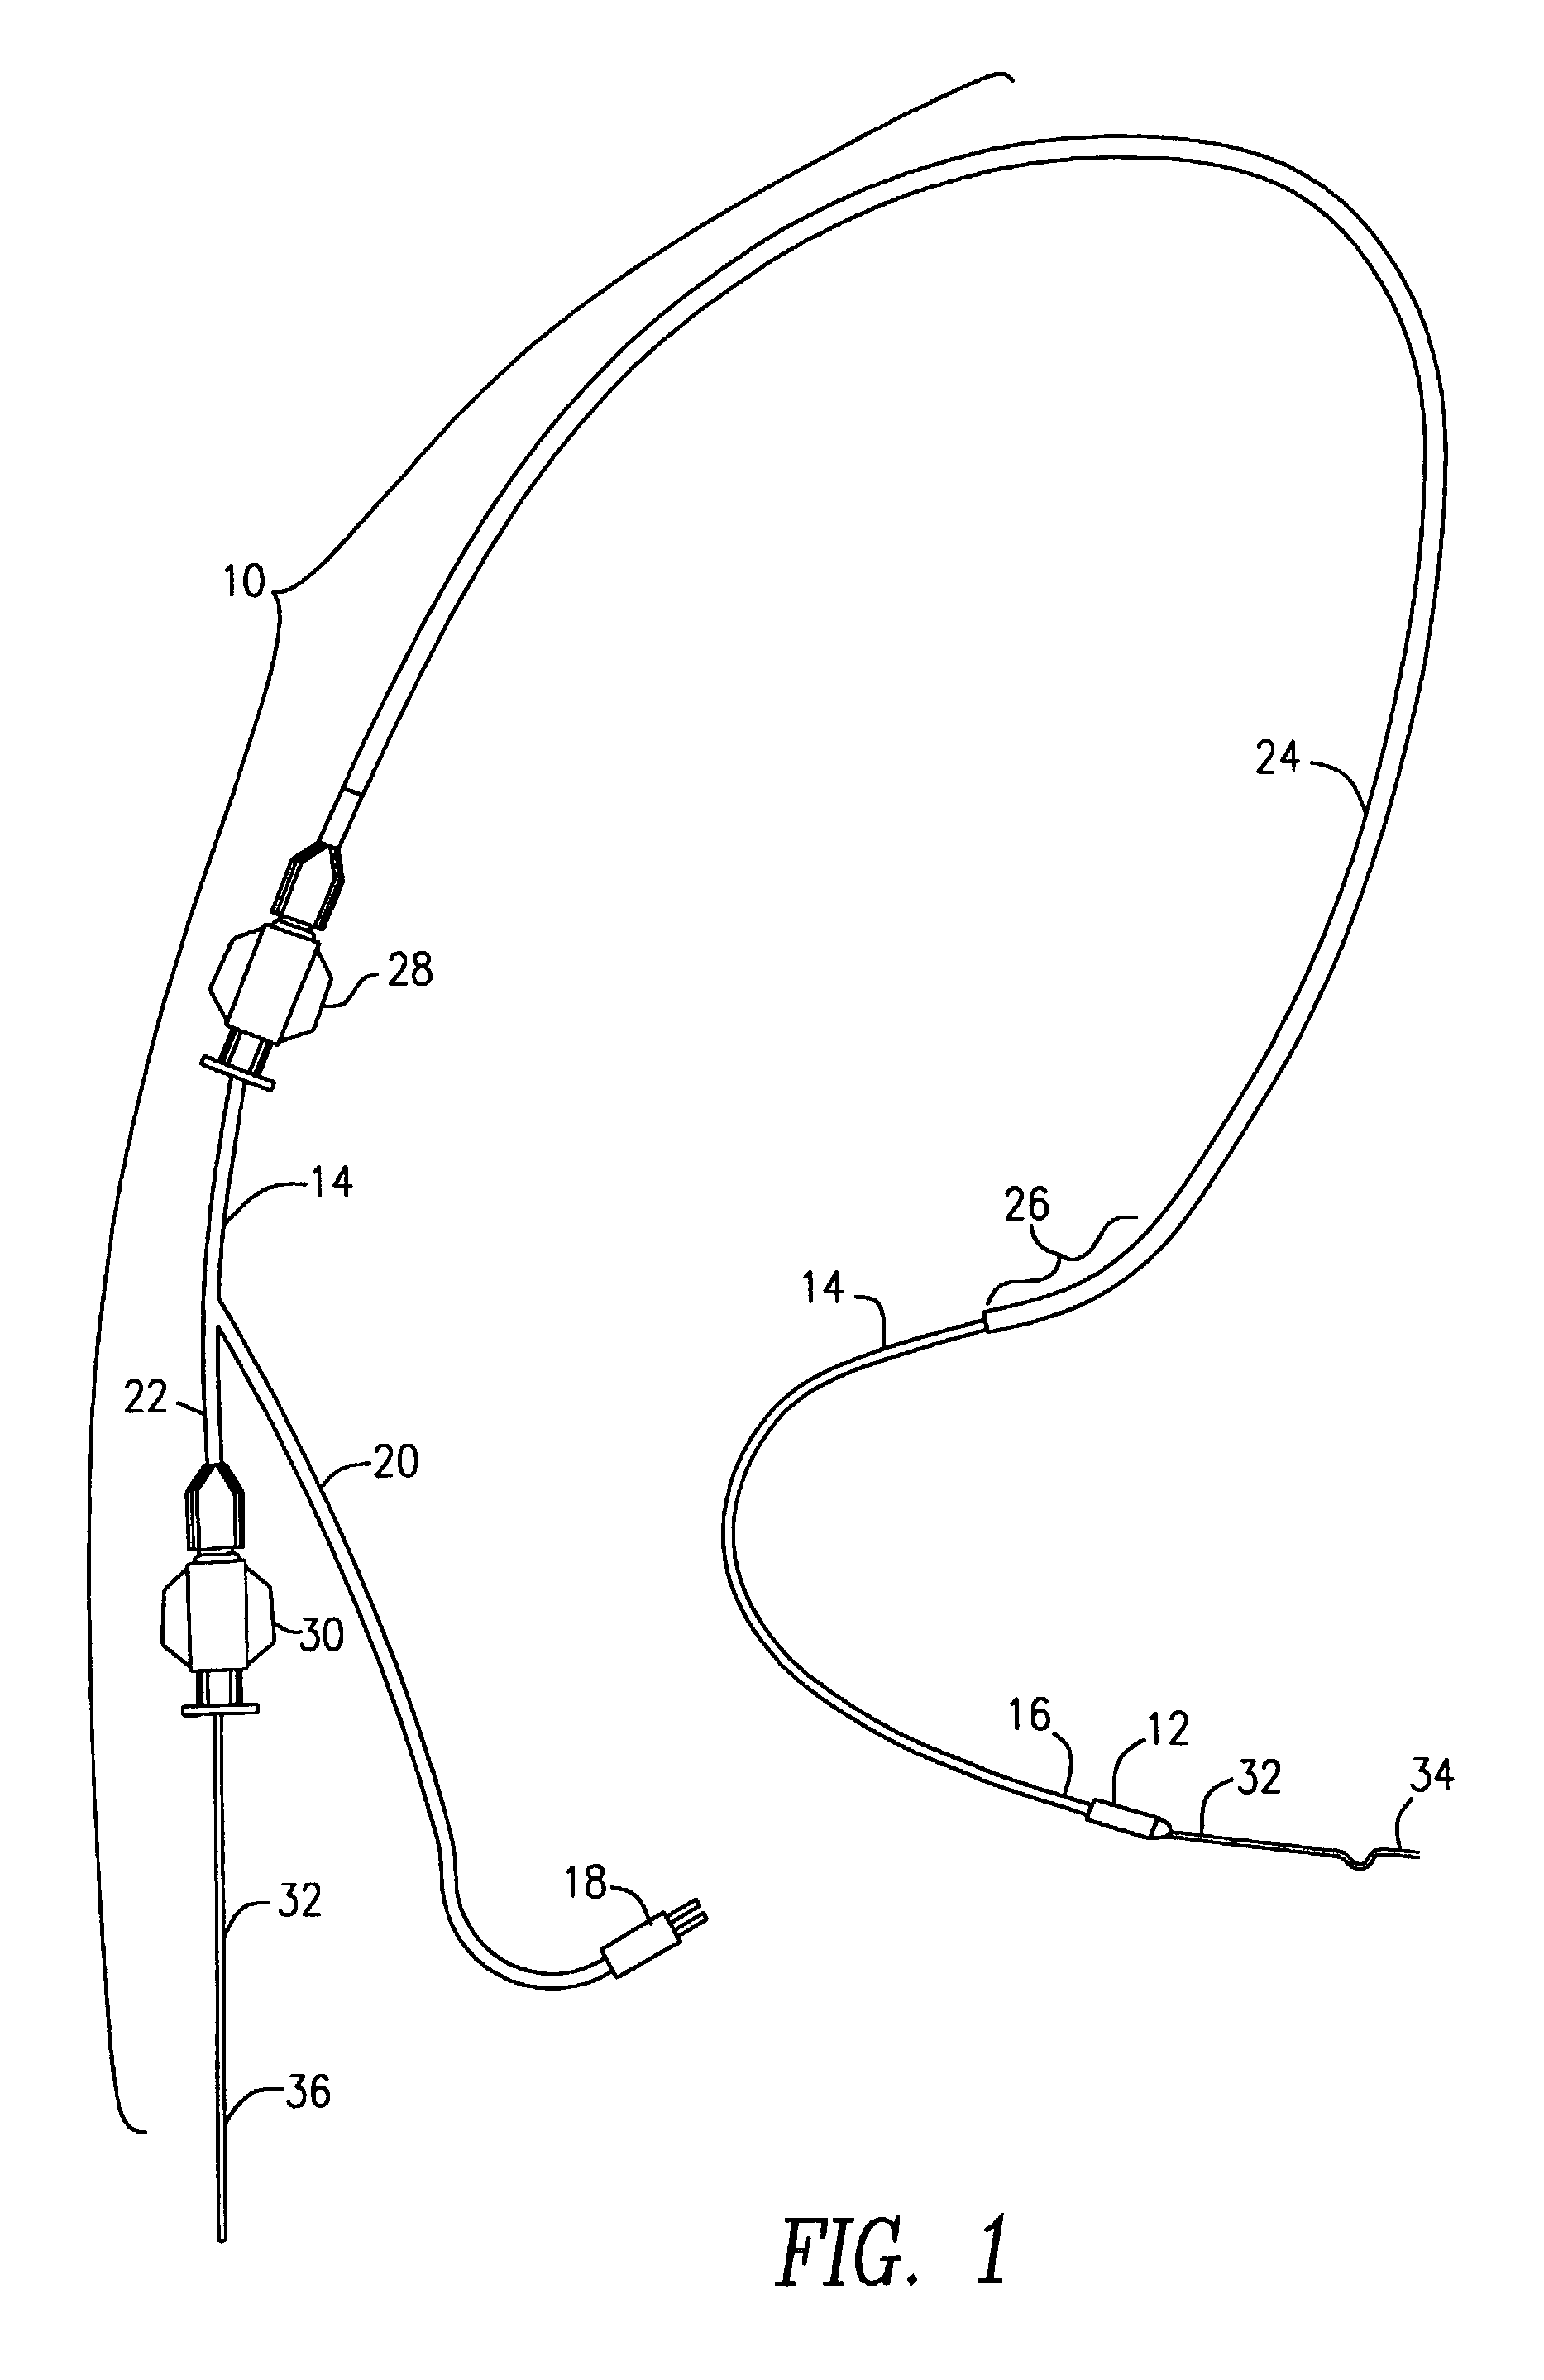 Apparatus and method for transcervical sterilization by application of ultrasound